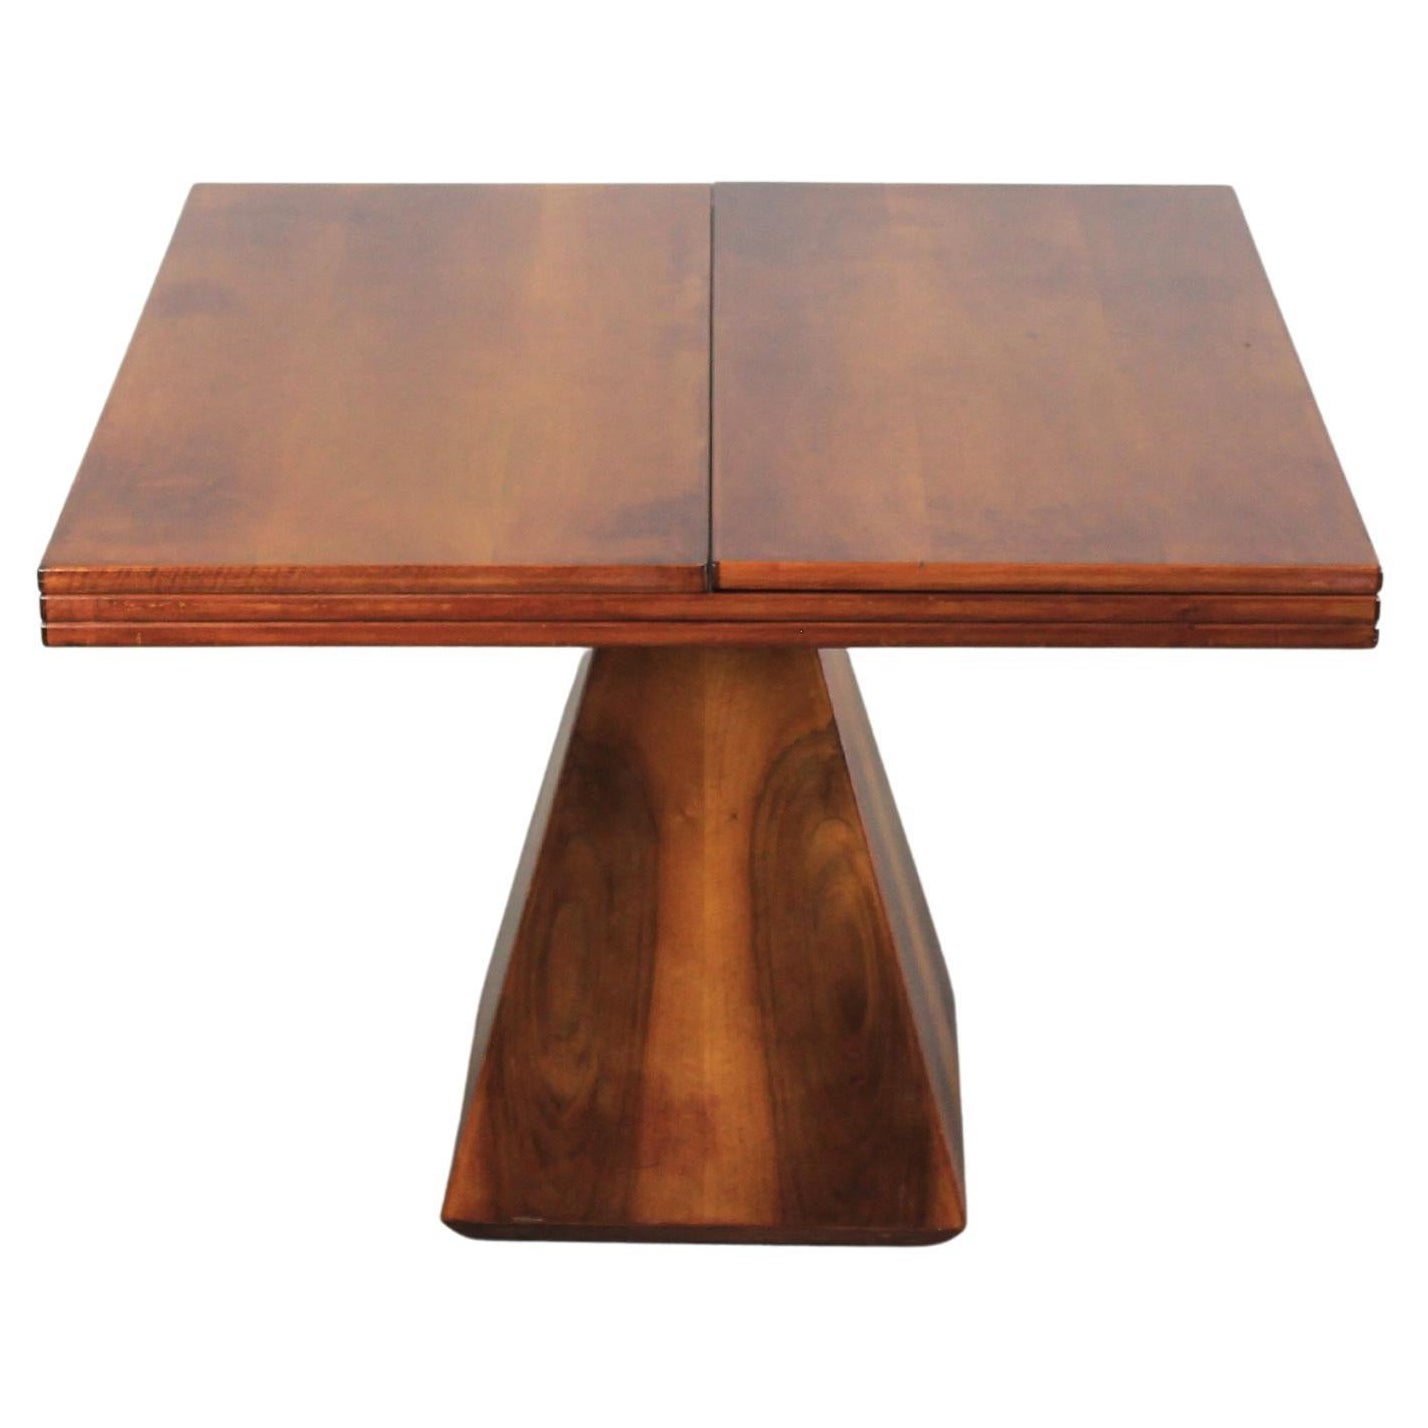 Vittorio Introini Chelsea Extendable Table in Walnut Wood by Saporiti 1960s